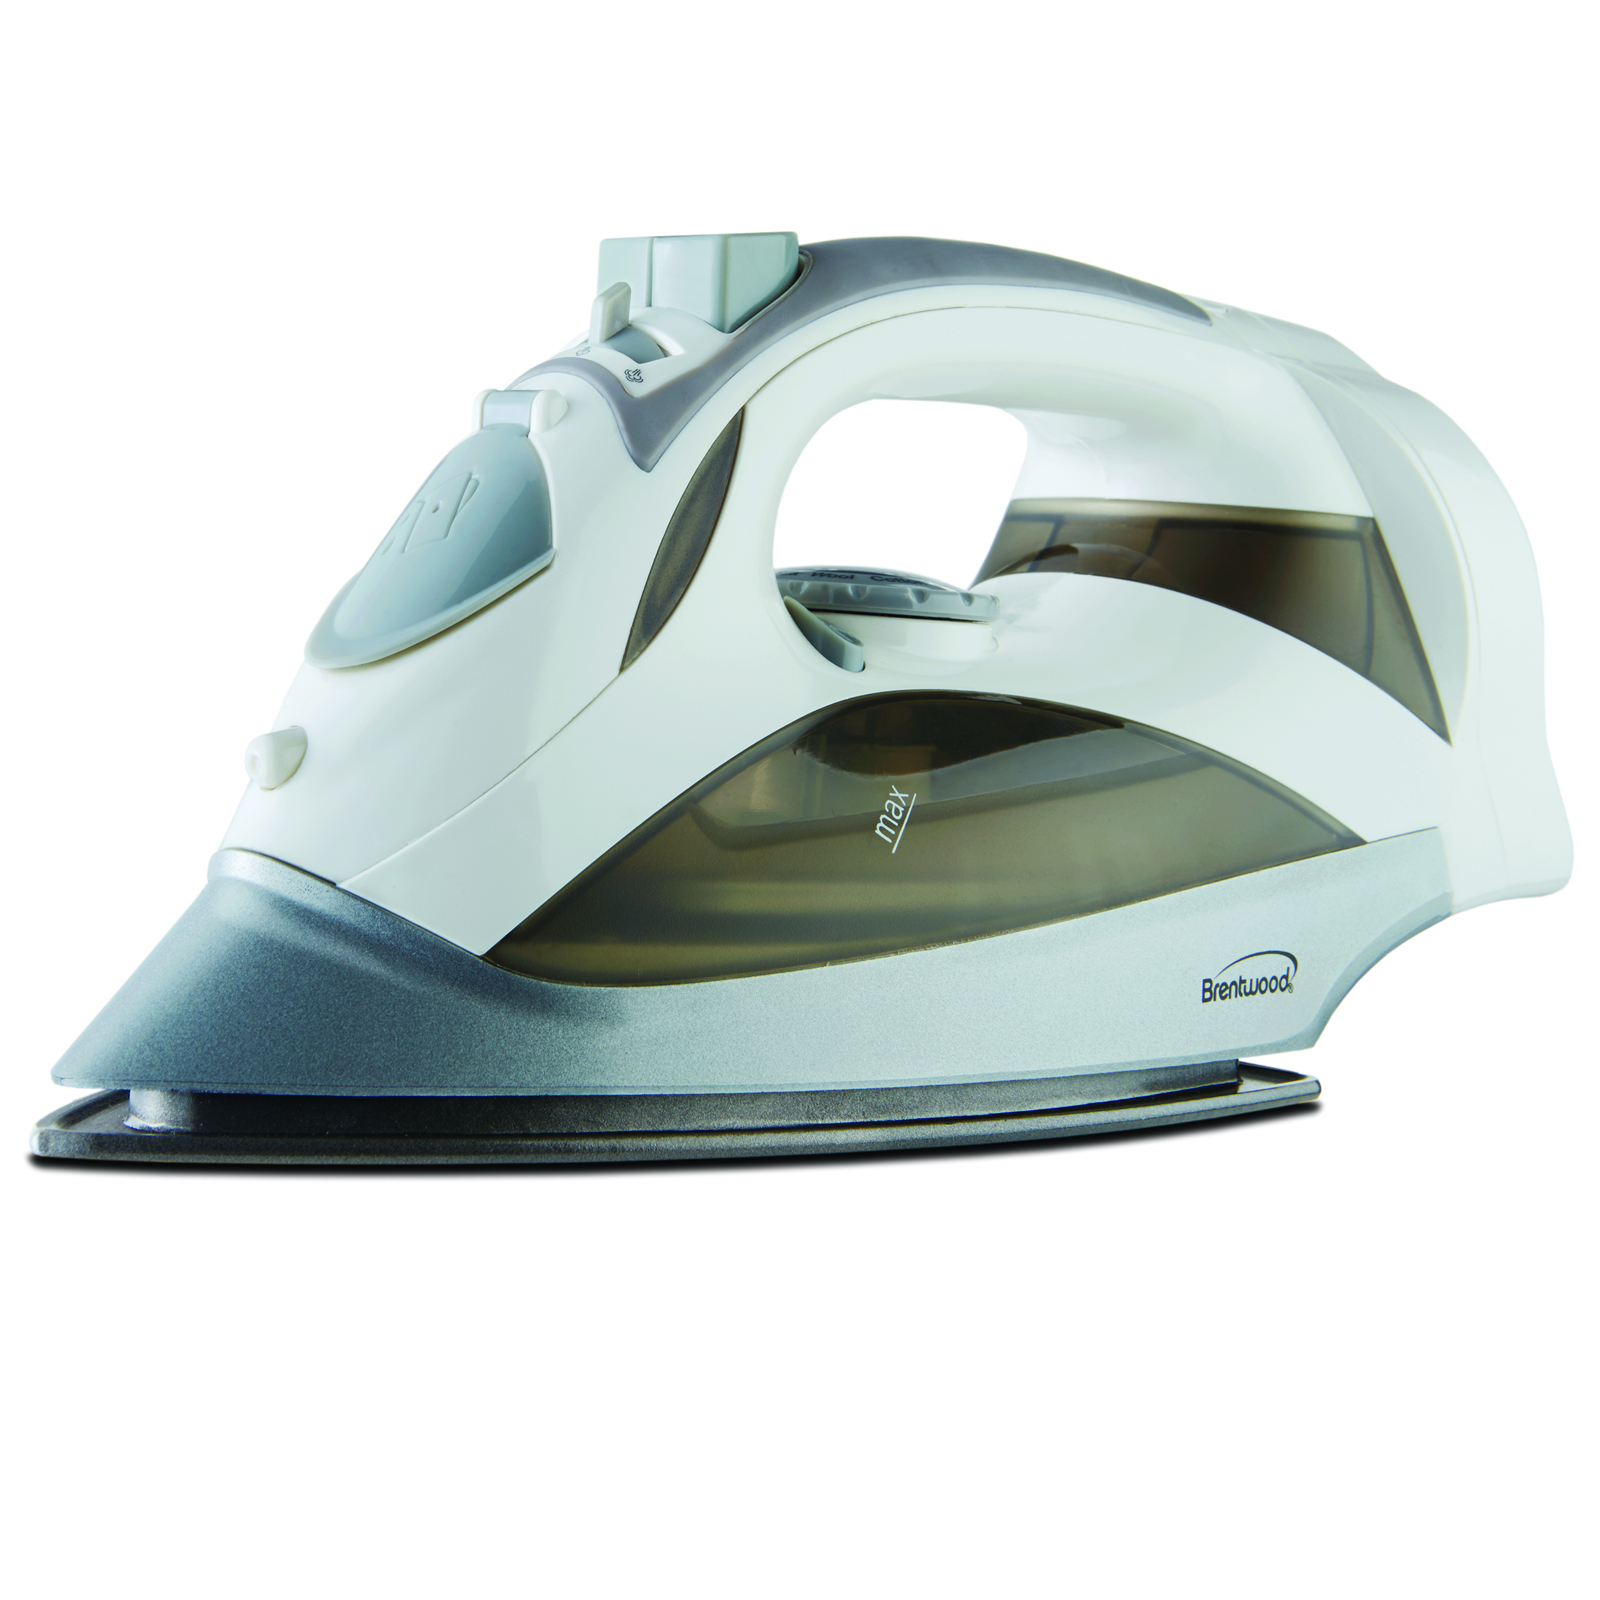 Brentwood 97094457M Steam Iron With Retractable Cord - White